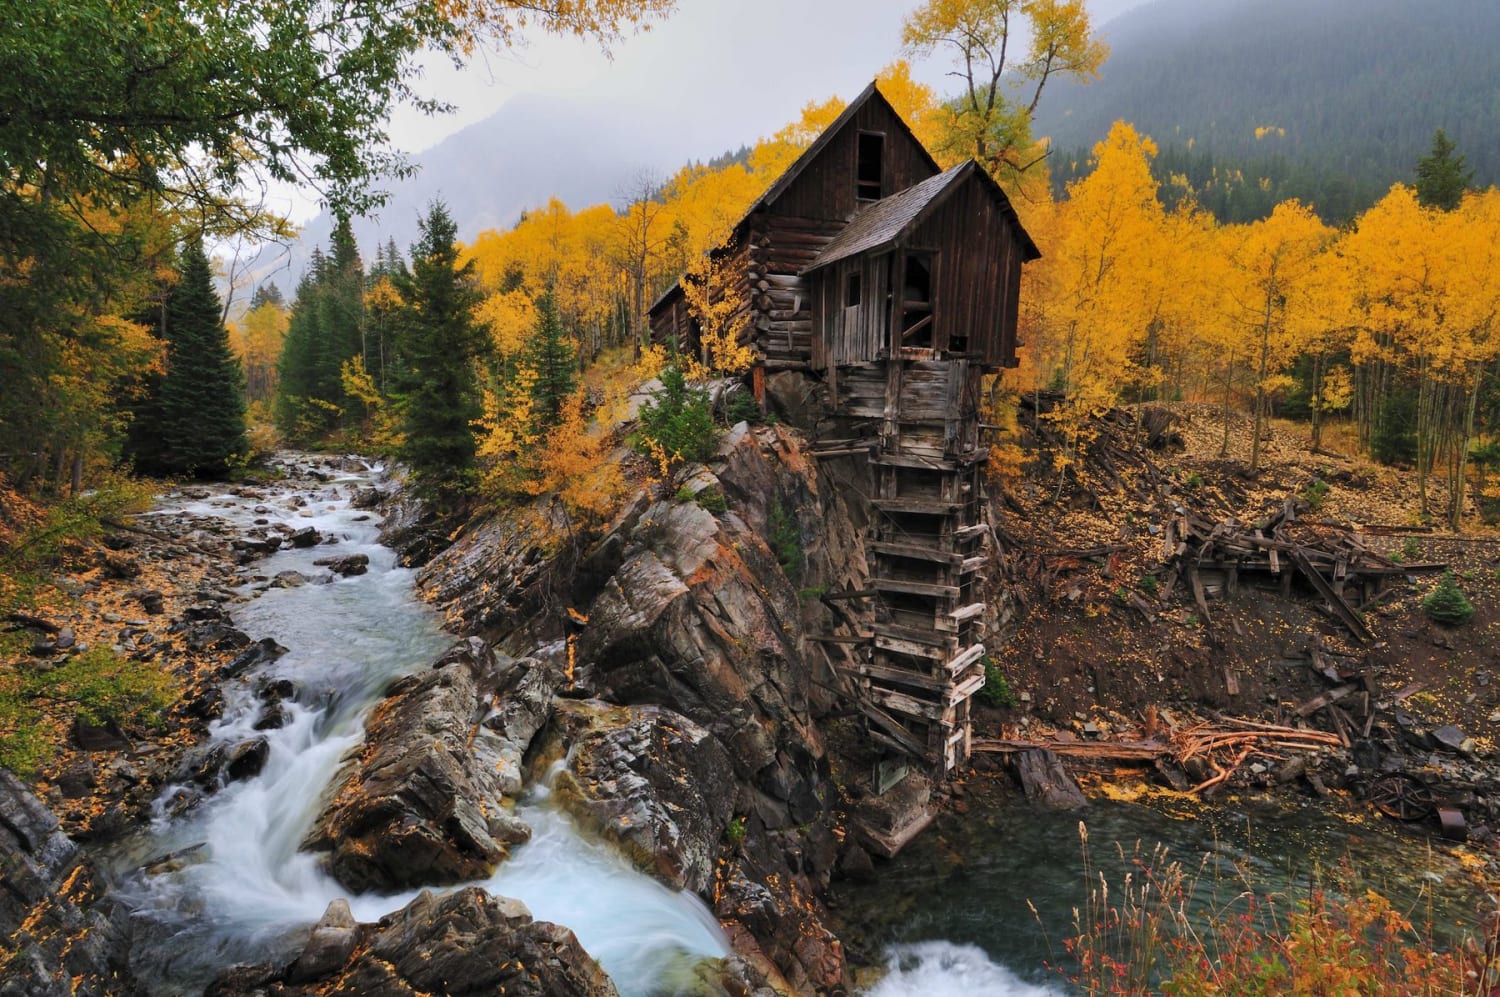 A picturesque abandoned mill in Colorado (the shot is from phuks. co)